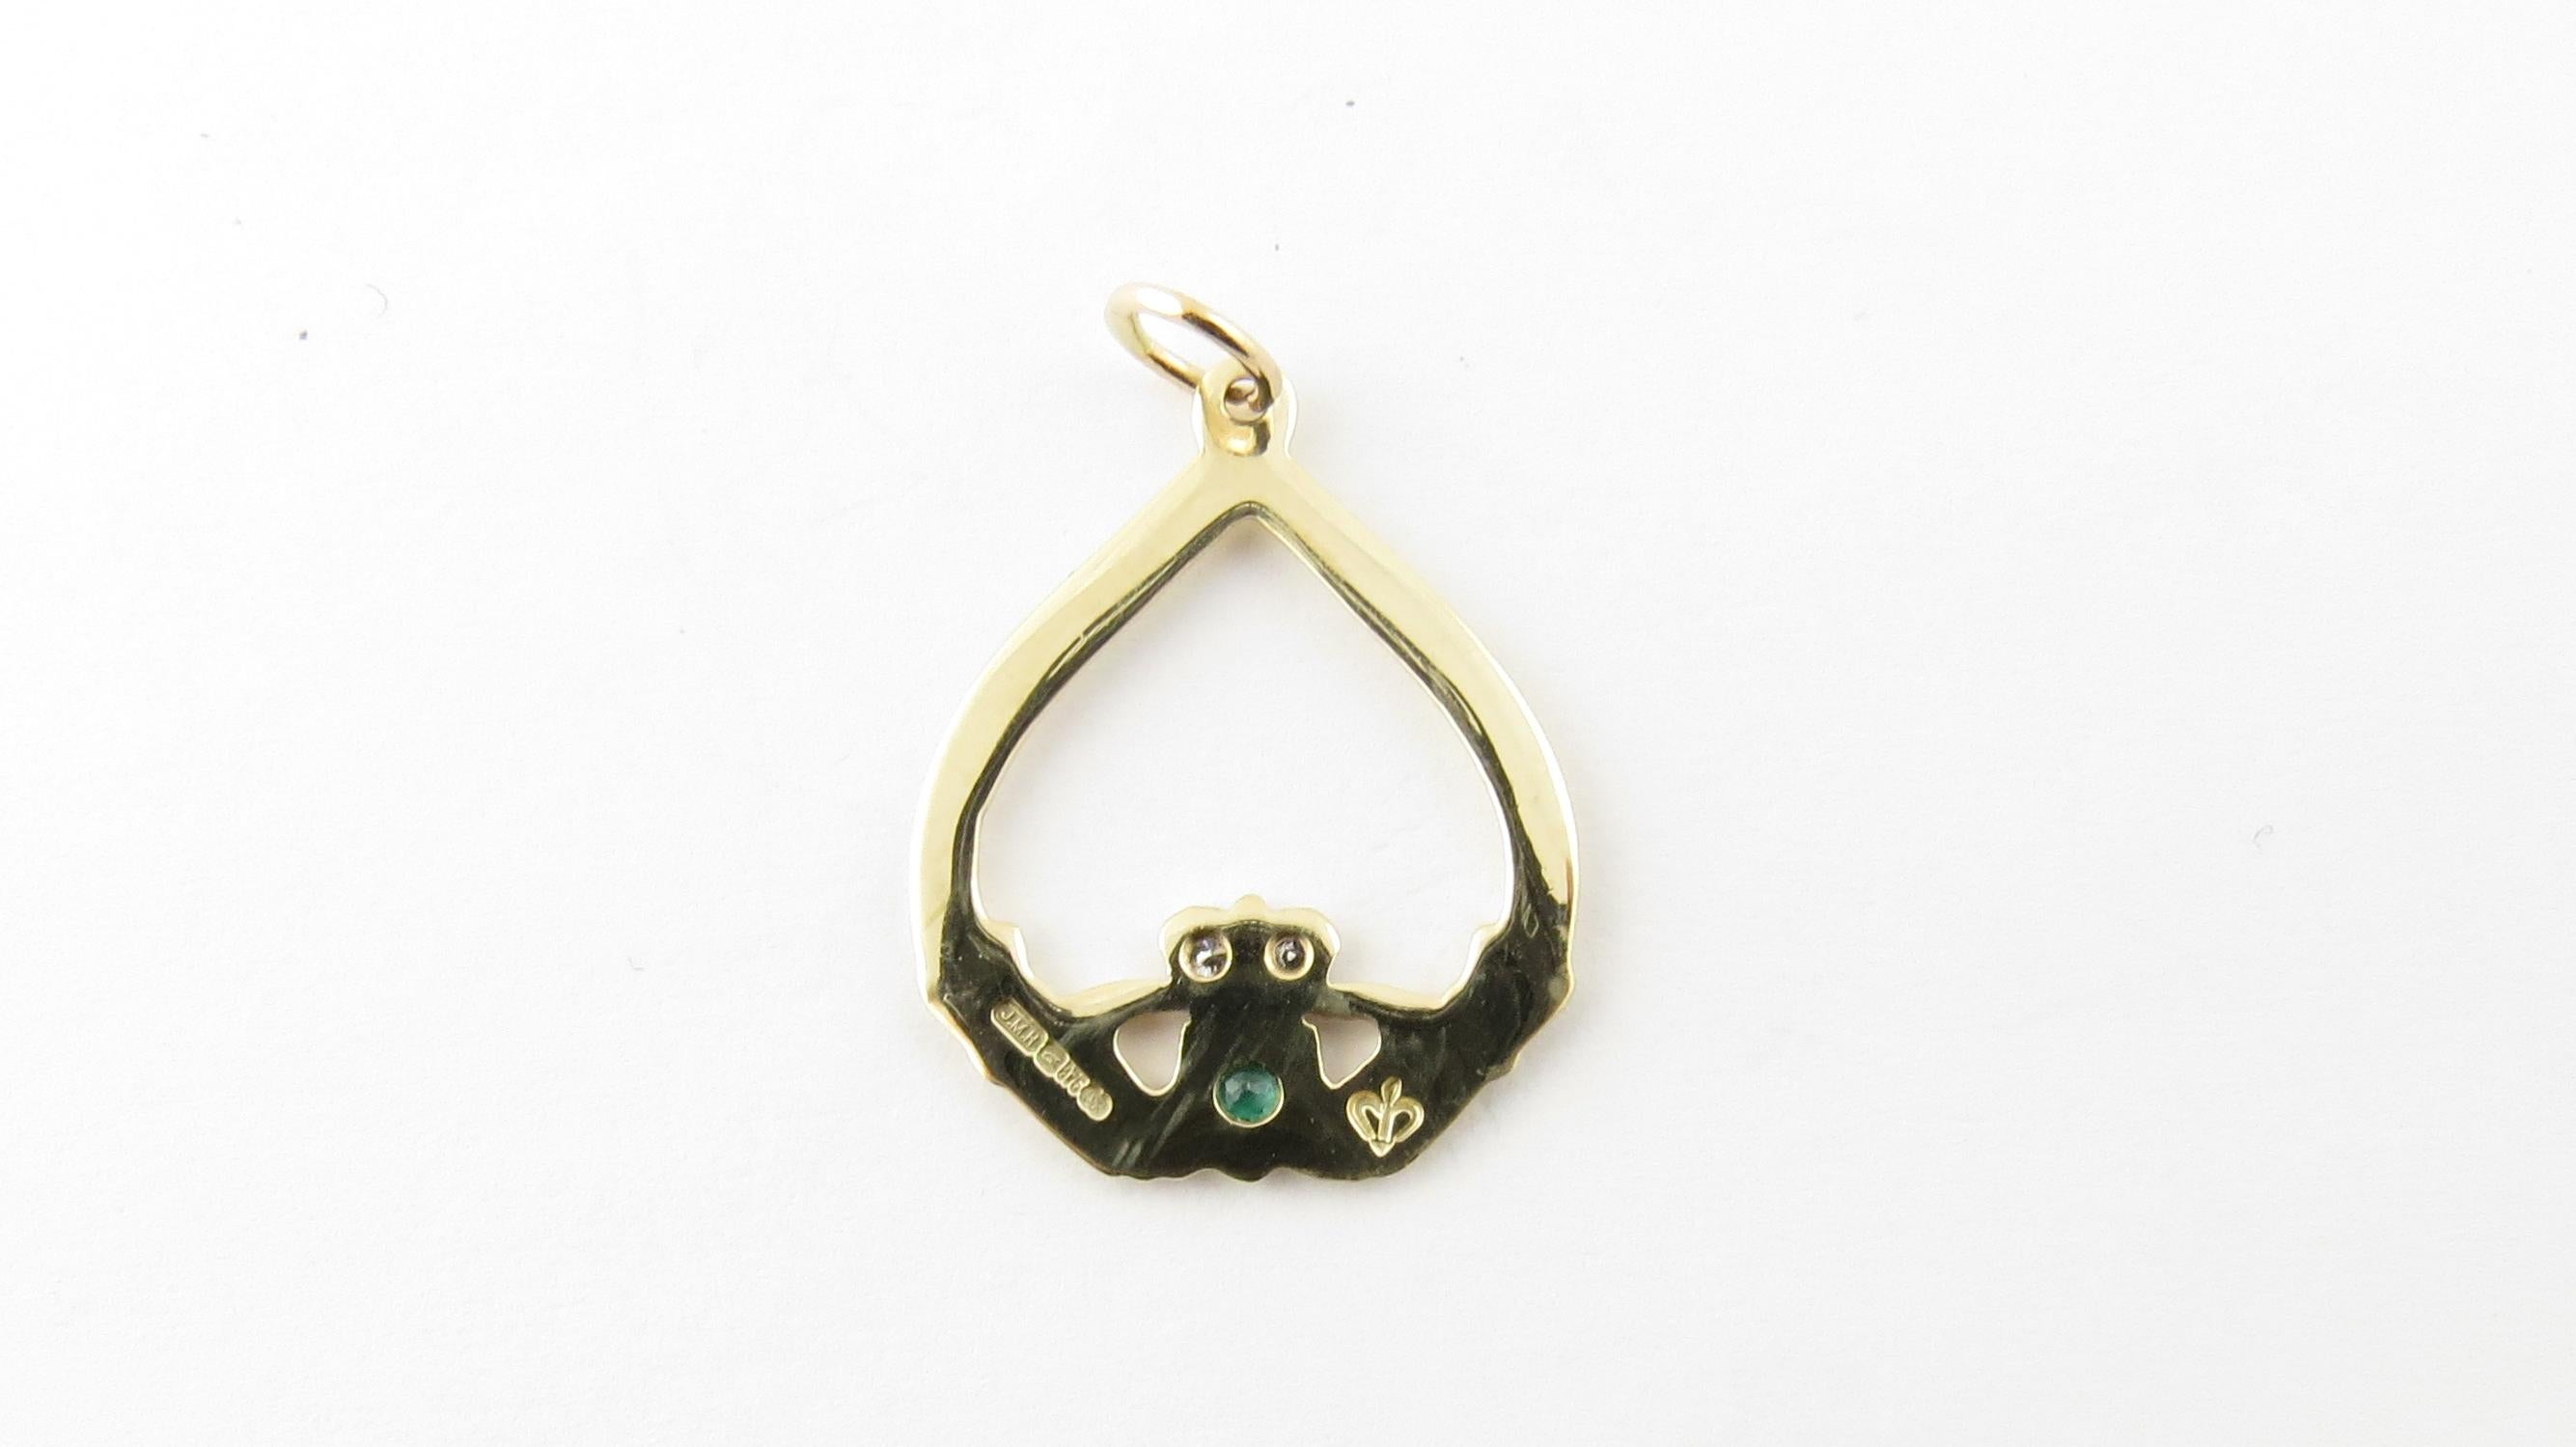 Vintage 9 Karat Yellow Gold Emerald and Diamond Claddagh Pendant

The traditional Irish Claddagh is a symbol of friendship, love and loyalty.

This lovely Claddagh pendant is accented with two round brilliant cut diamonds and one round genuine